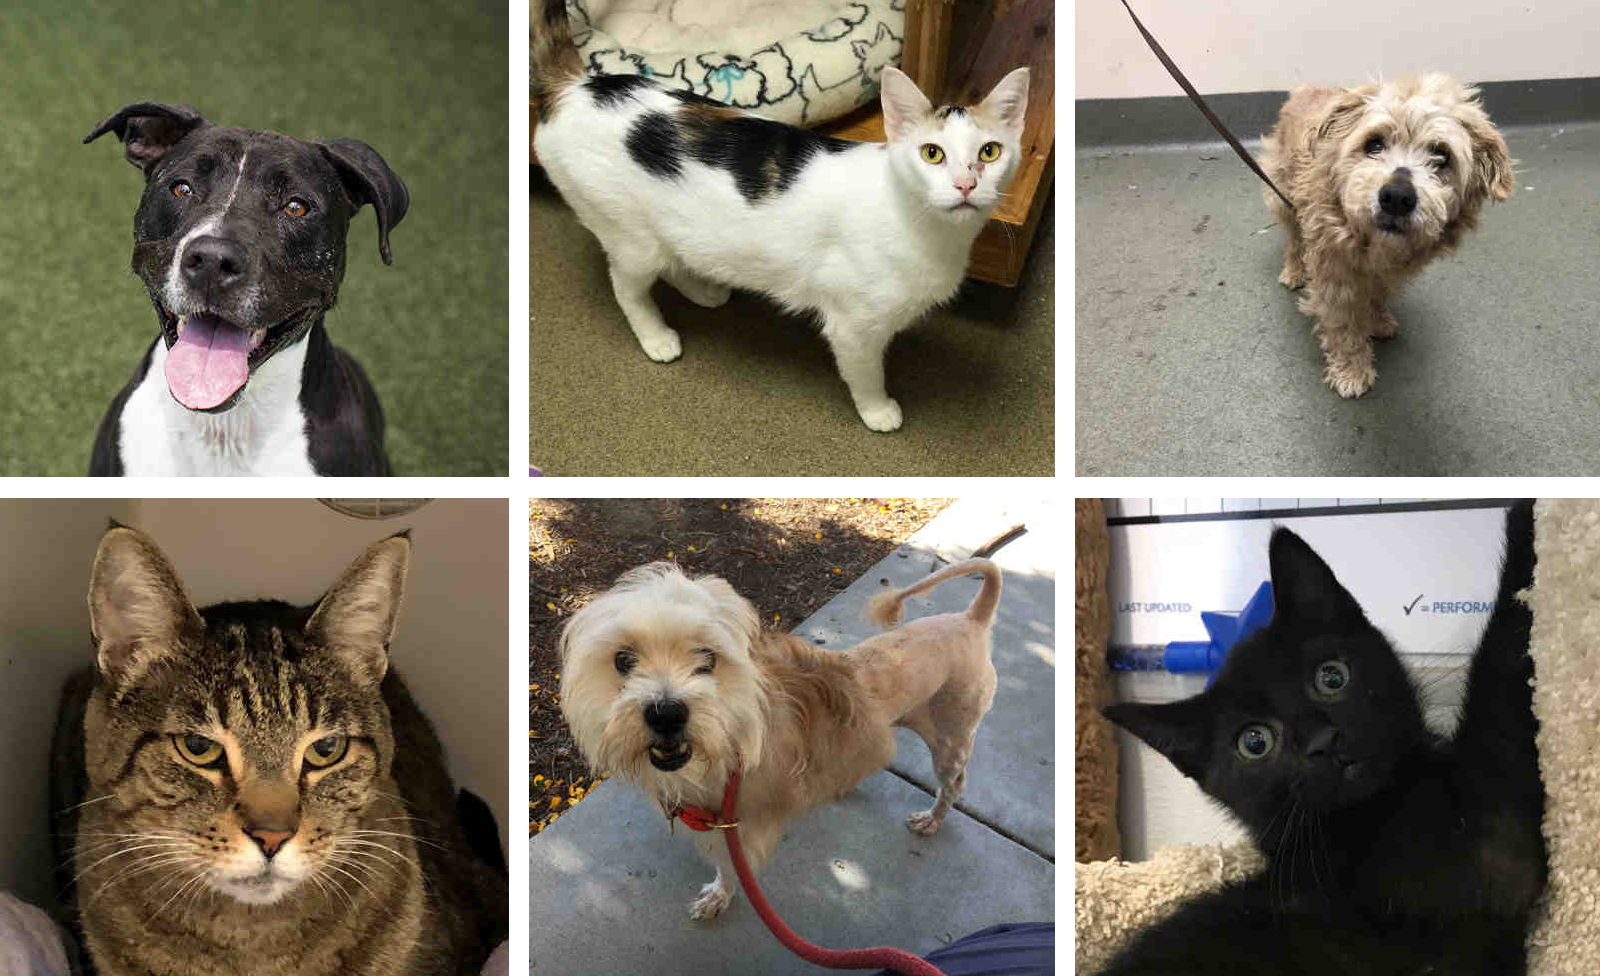 Three cats and three dogs that are available for adoption at the County Animal Shelter.